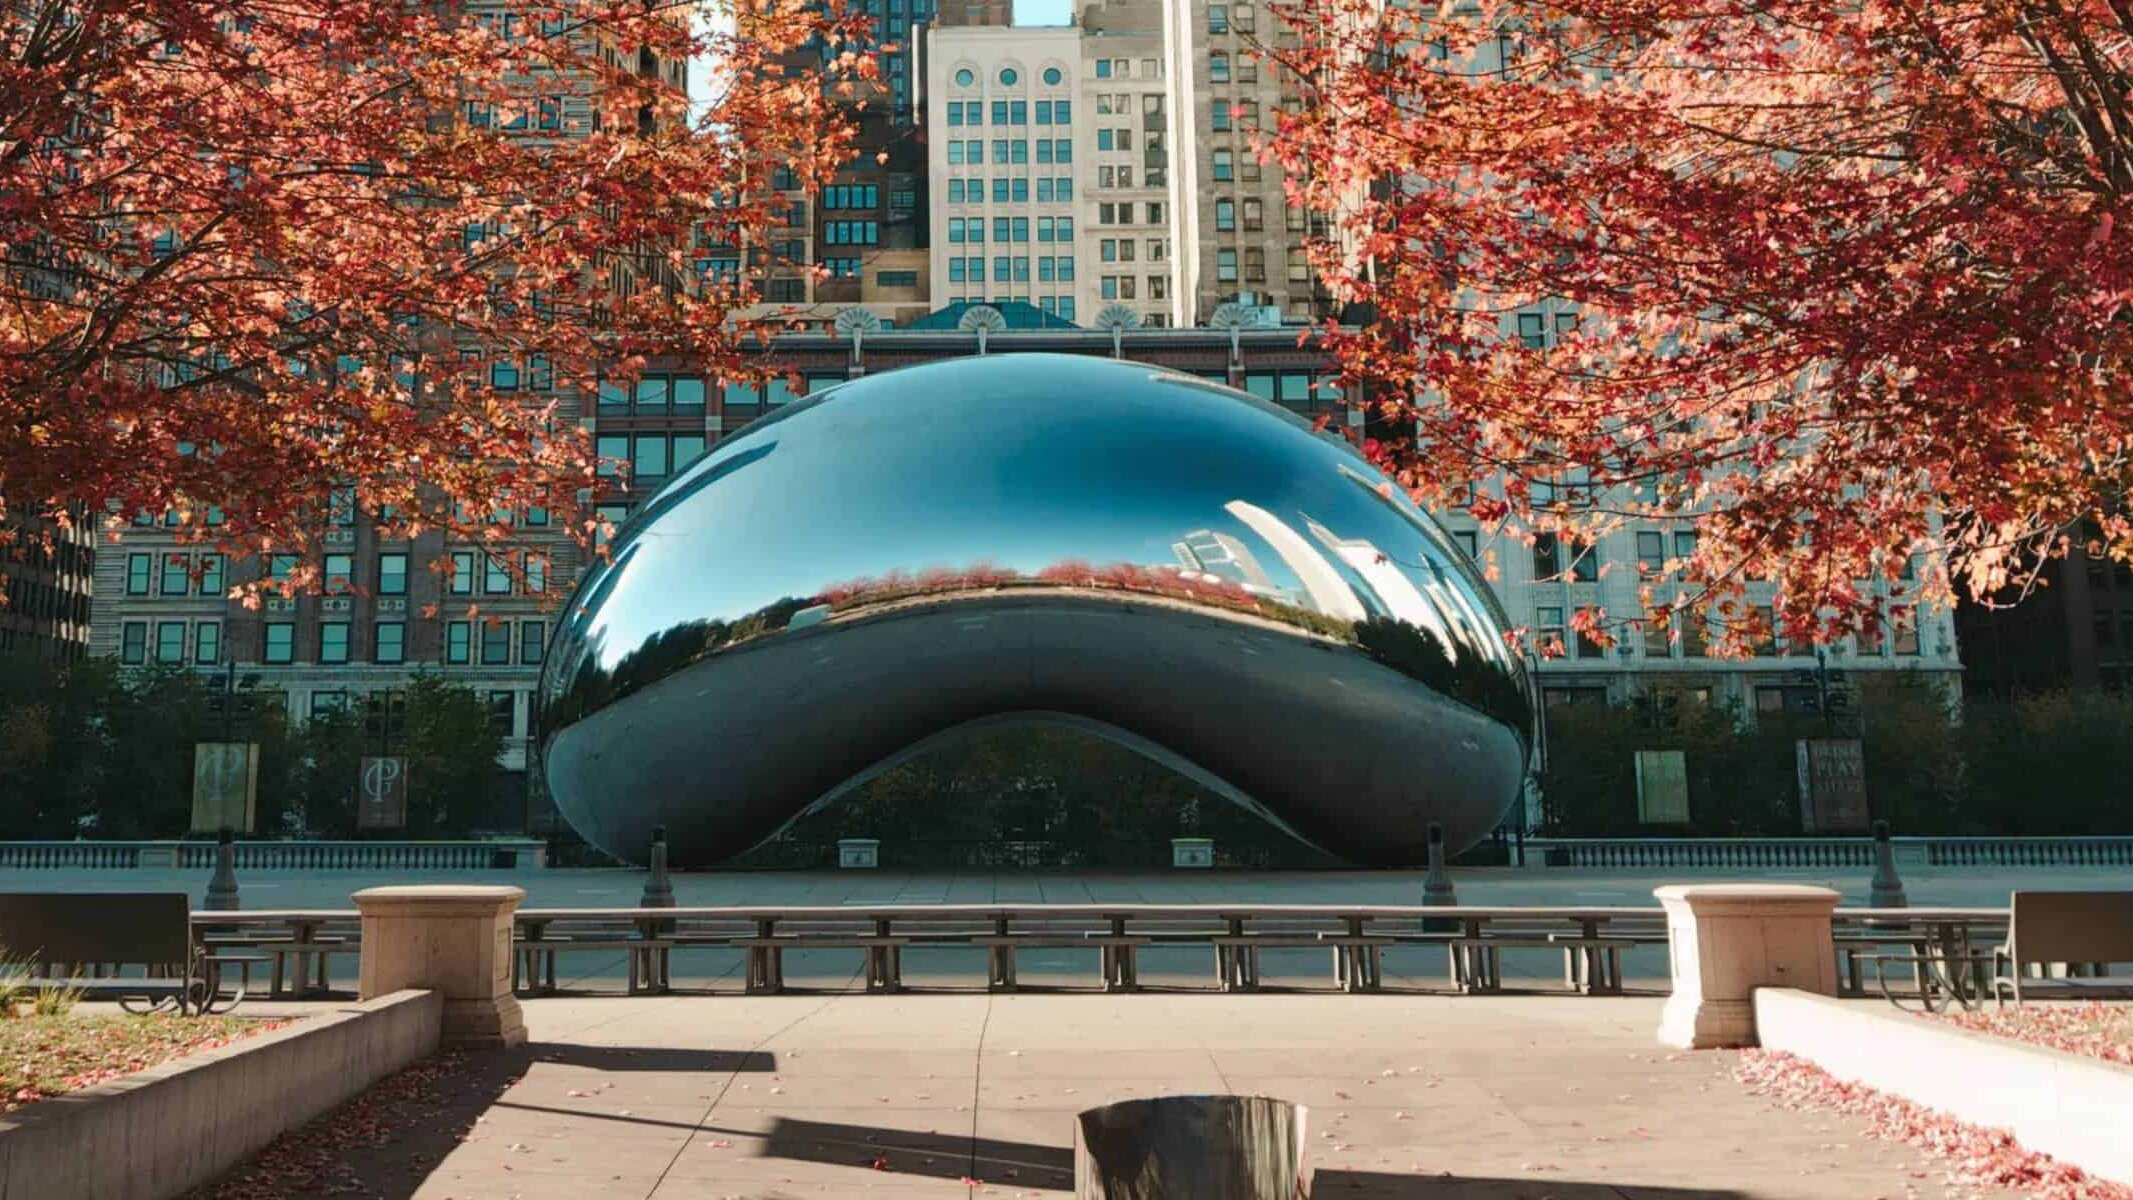 A picture of the famous bean from Chicago